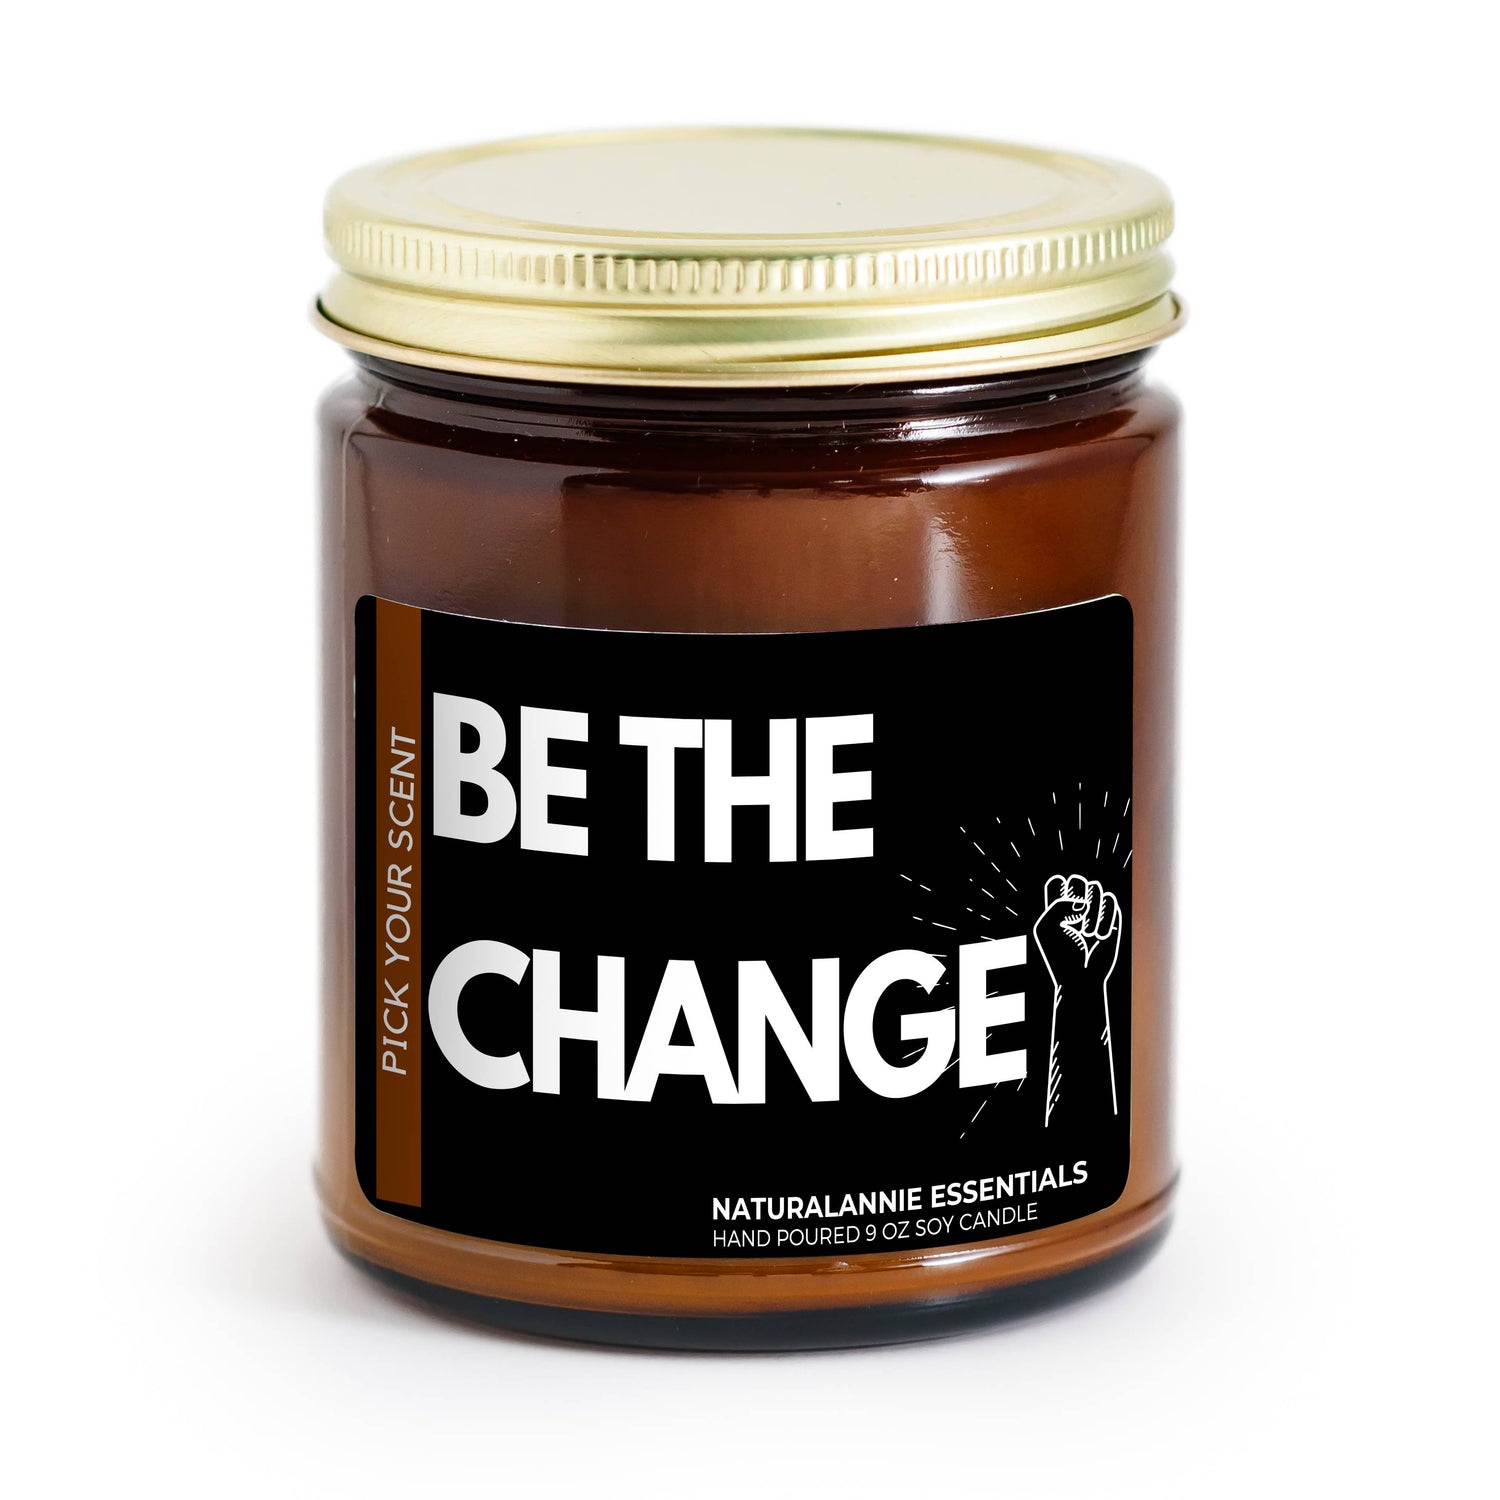 Be the change soy candle by NaturalAnnie Essentials